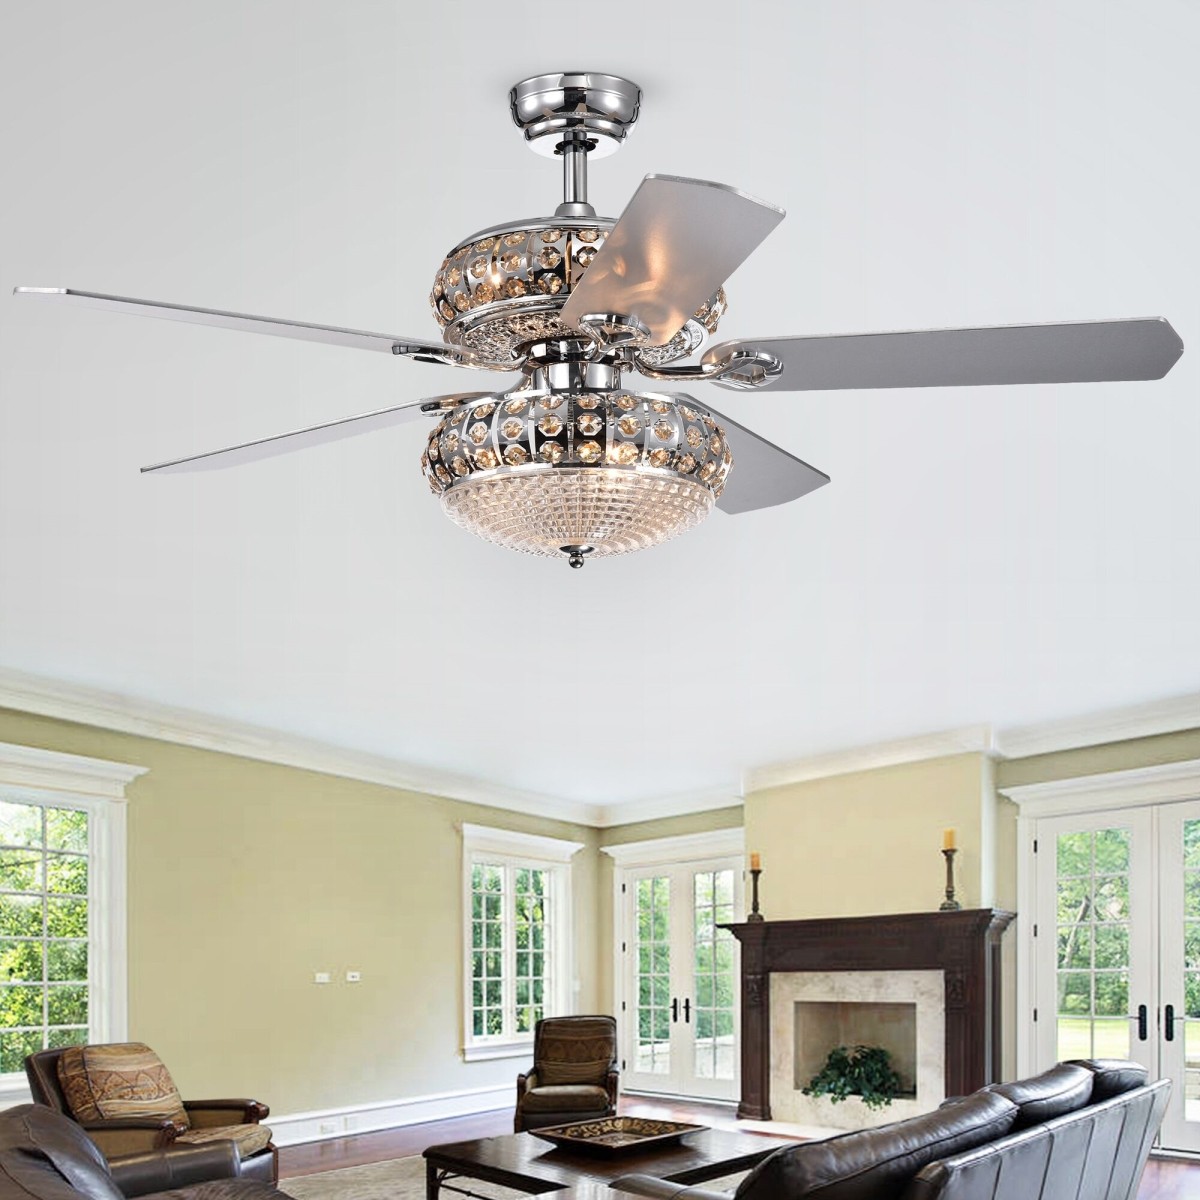 Becsdale Dual Lamp 52-Inch 5-Blade Lighted Ceiling Fan with Crystal Chandelier (incl Remote and 2 Color Option Fan Blades)